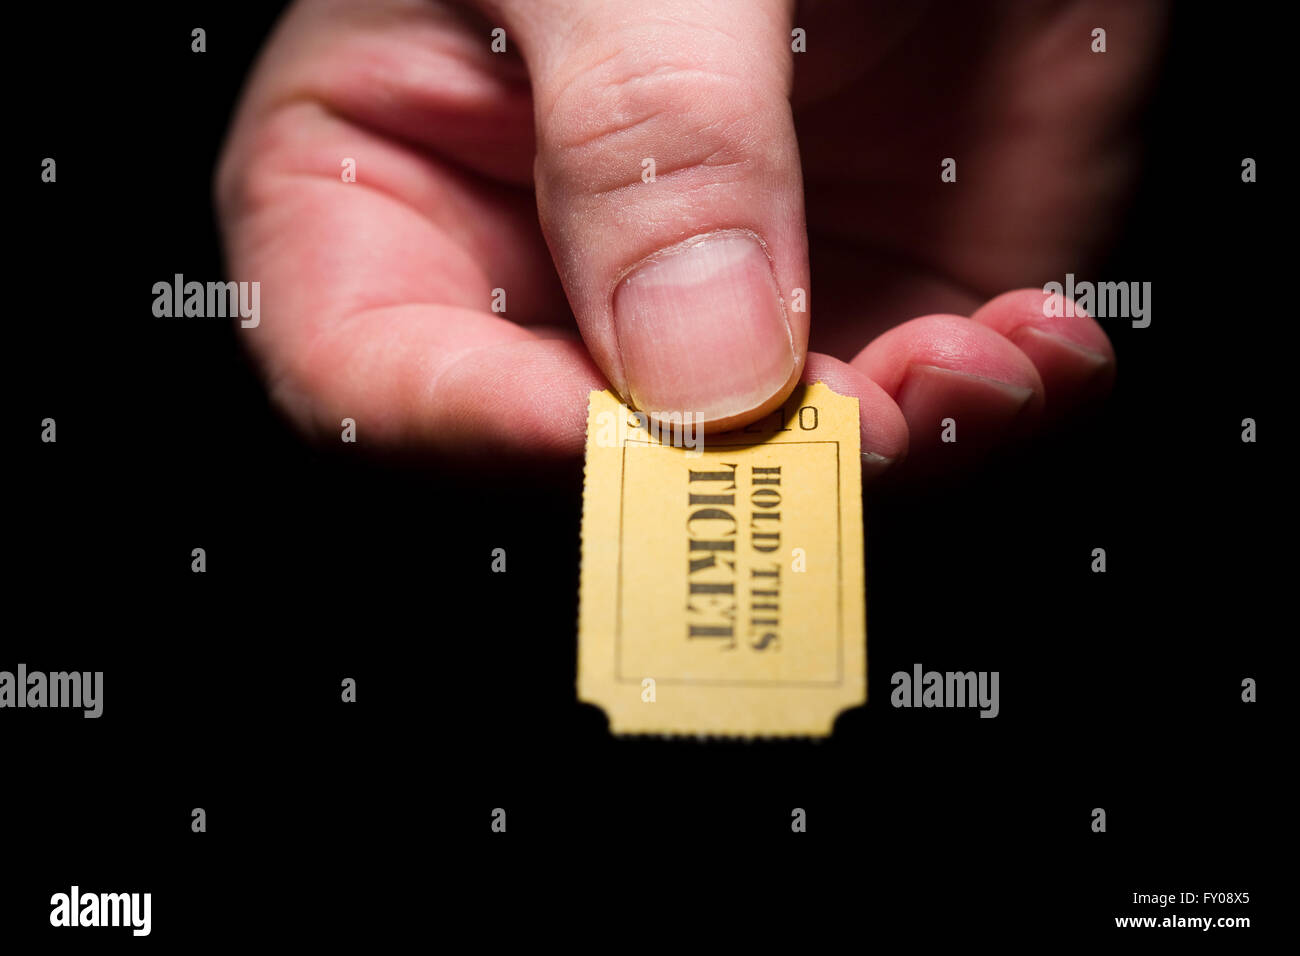 A man's right hand holding a yellow 7-digit ticket marked with the words 'HOLD THIS TICKET' in black ink Stock Photo